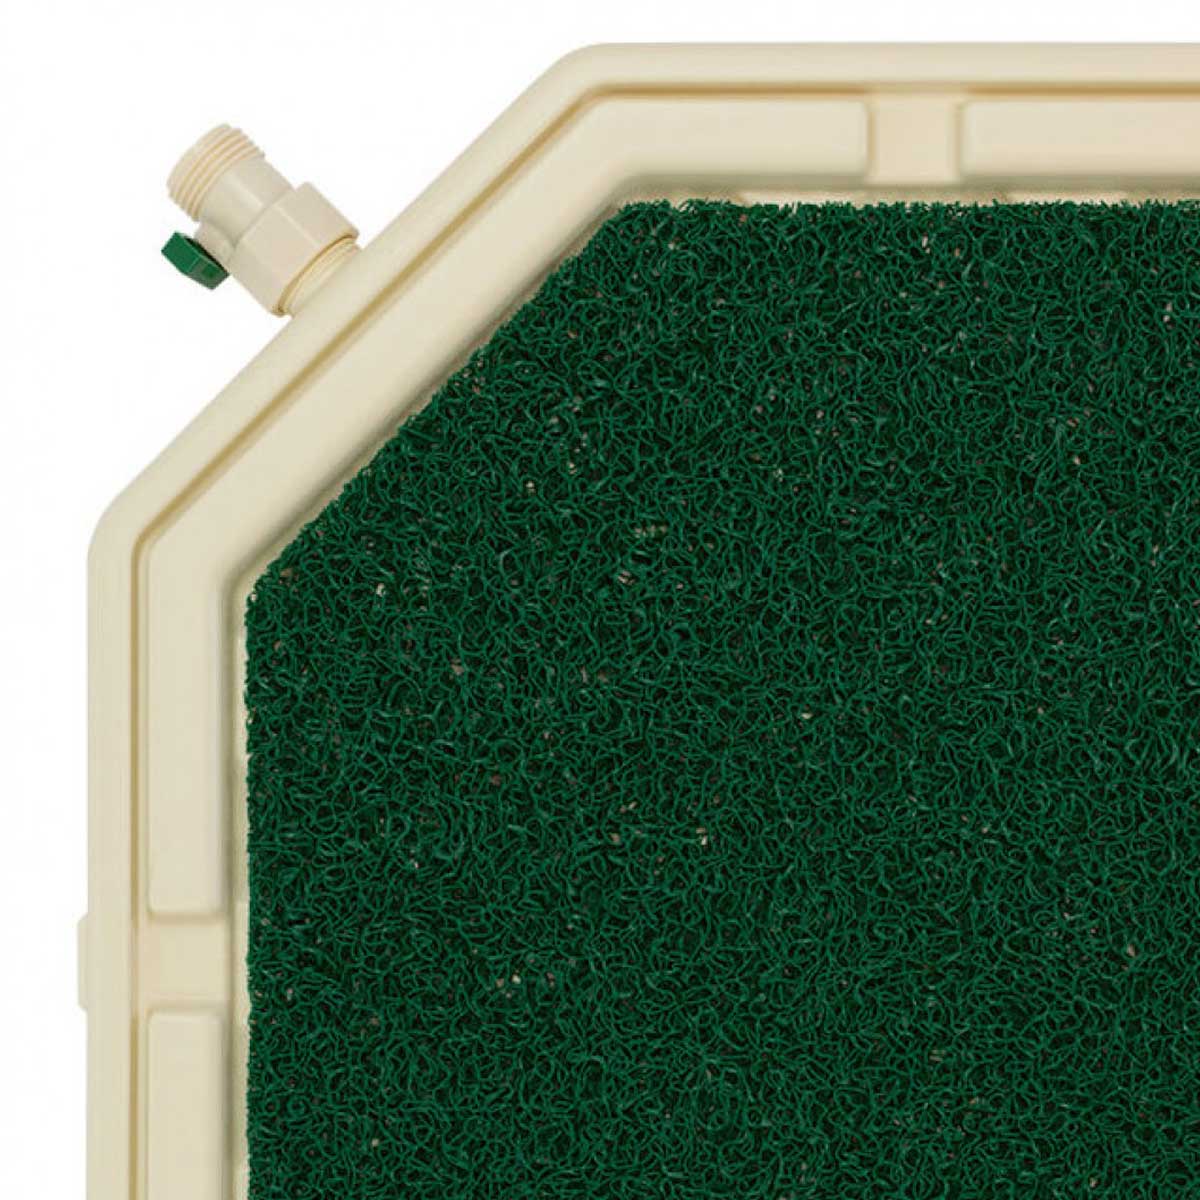 PetSafe Replacement Turf for Piddle Place Pet Potty